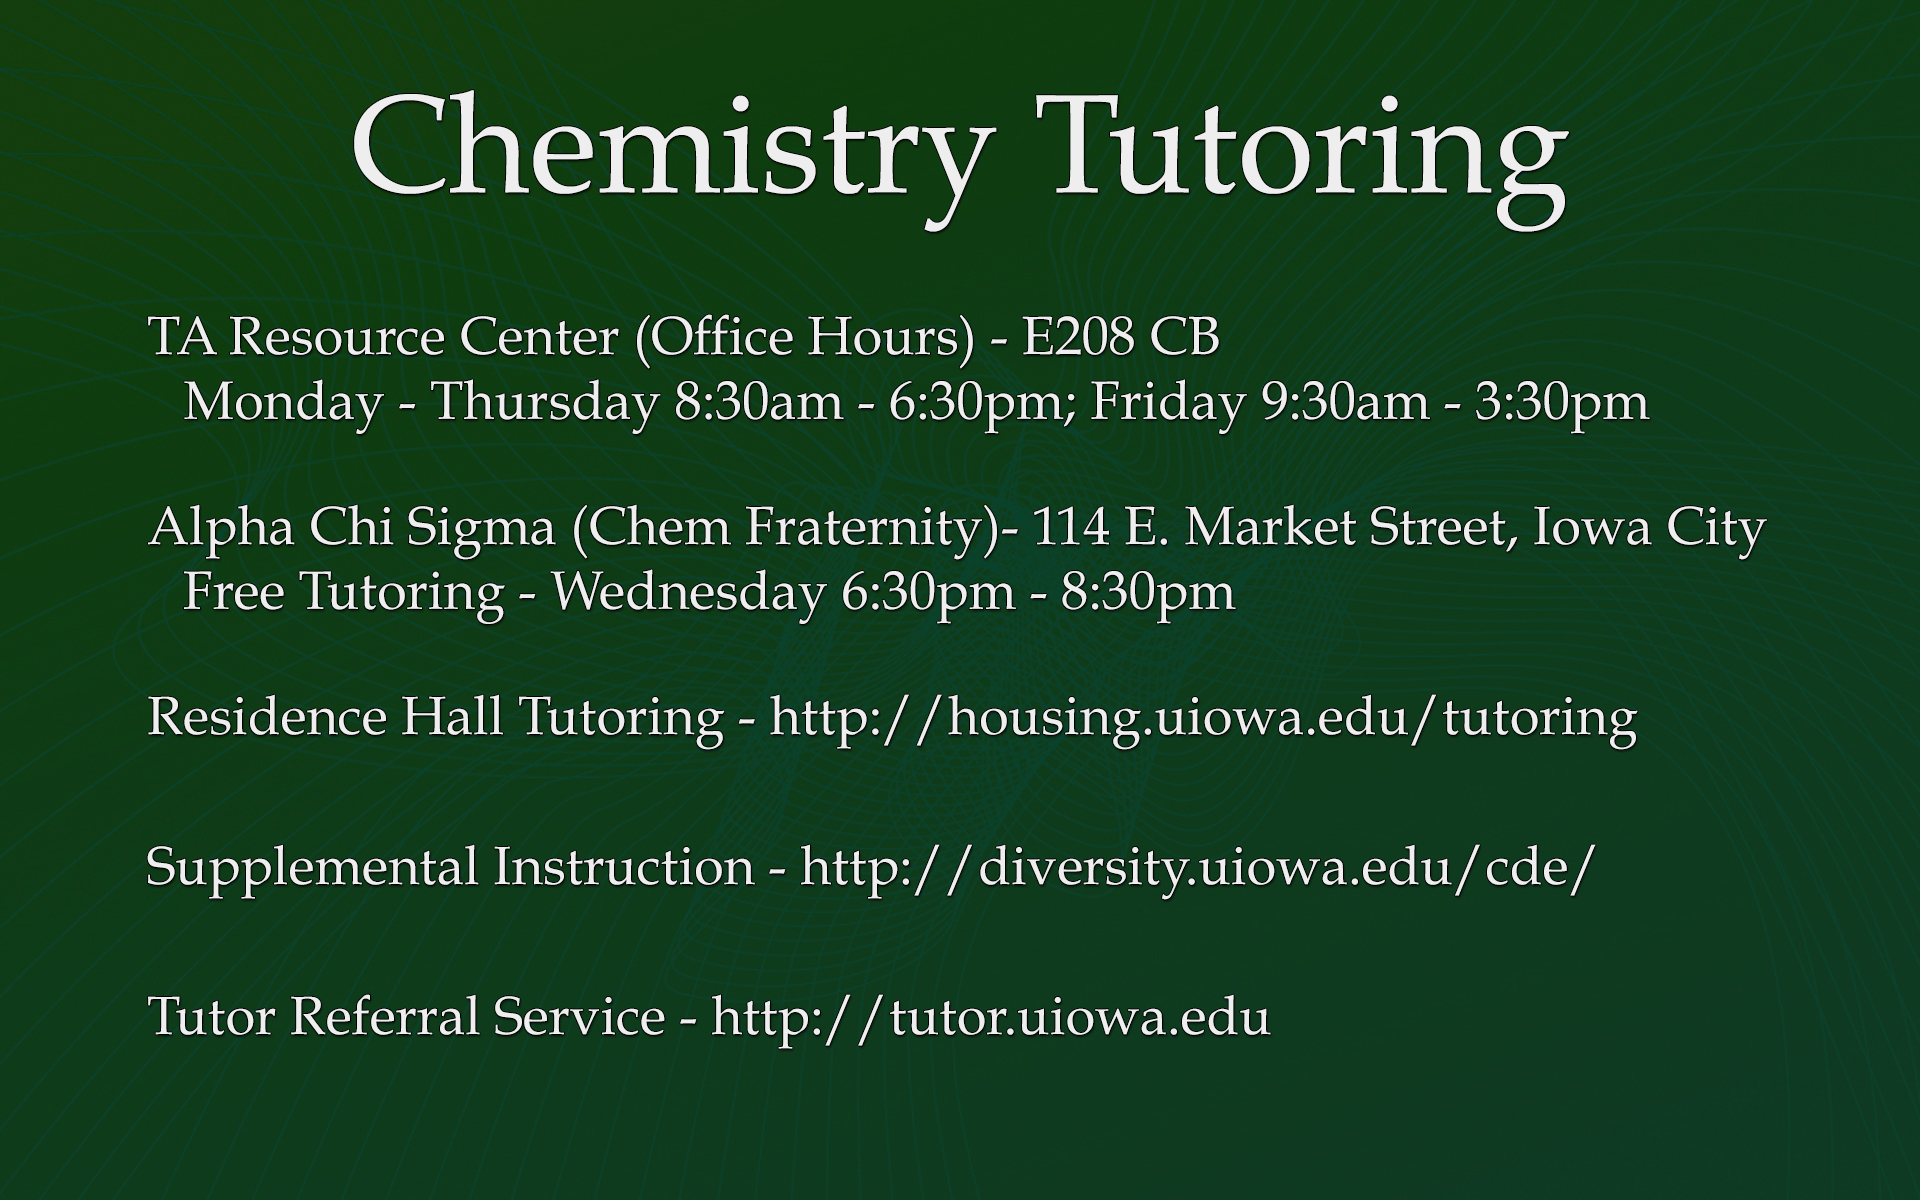 Chemistry Tutoring, TA Resource Center (Office Hours) - E208 CB Monday - Thursday 8:30am - 6:30pm; Friday 9:30am - 3:30pm